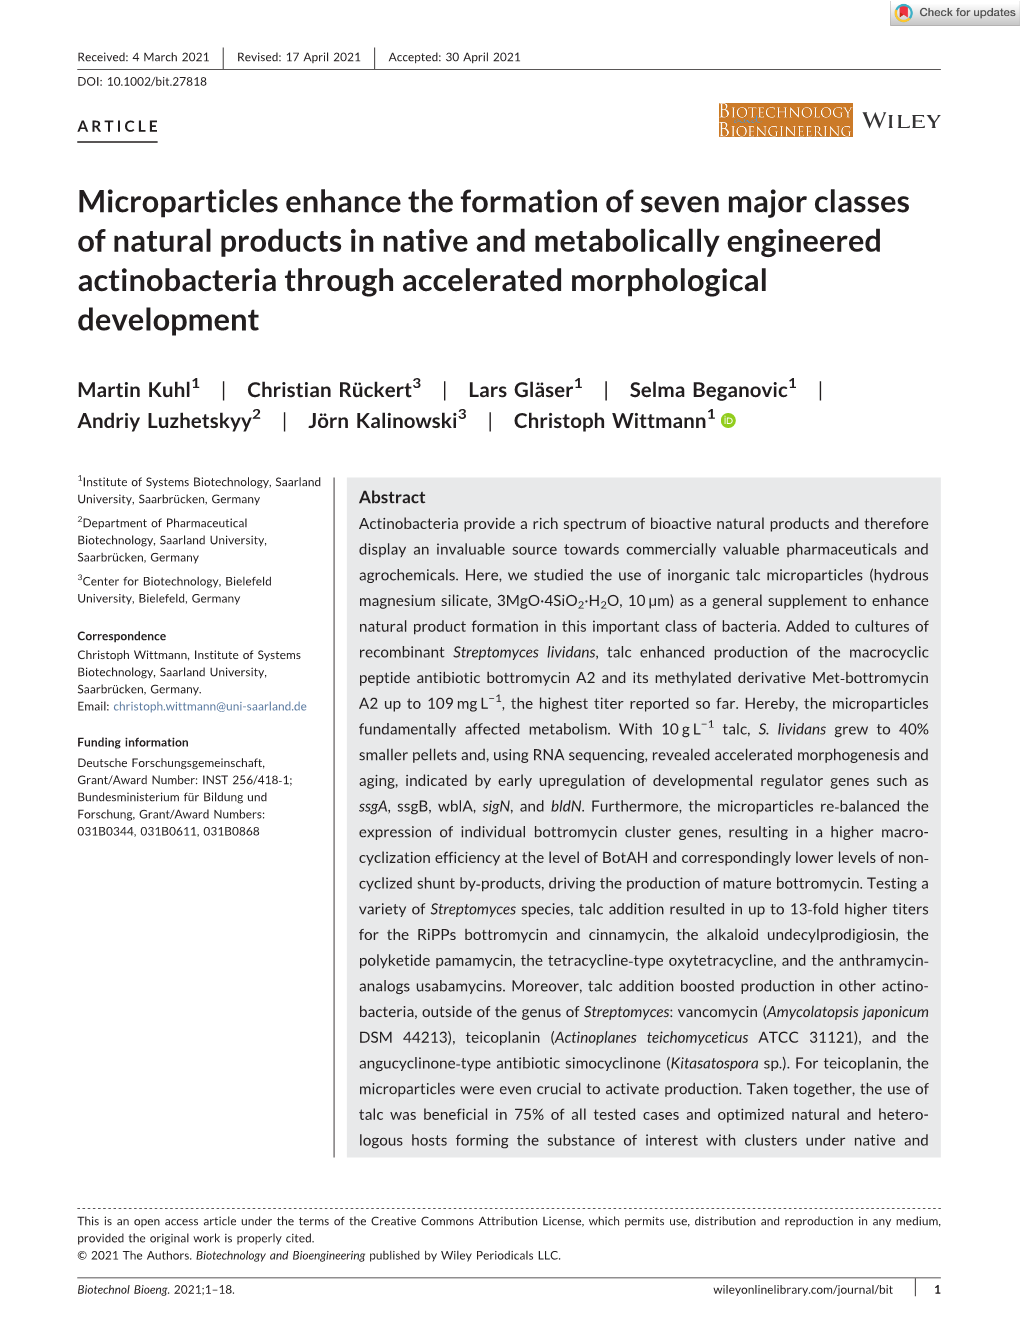 Microparticles Enhance the Formation of Seven Major Classes of Natural